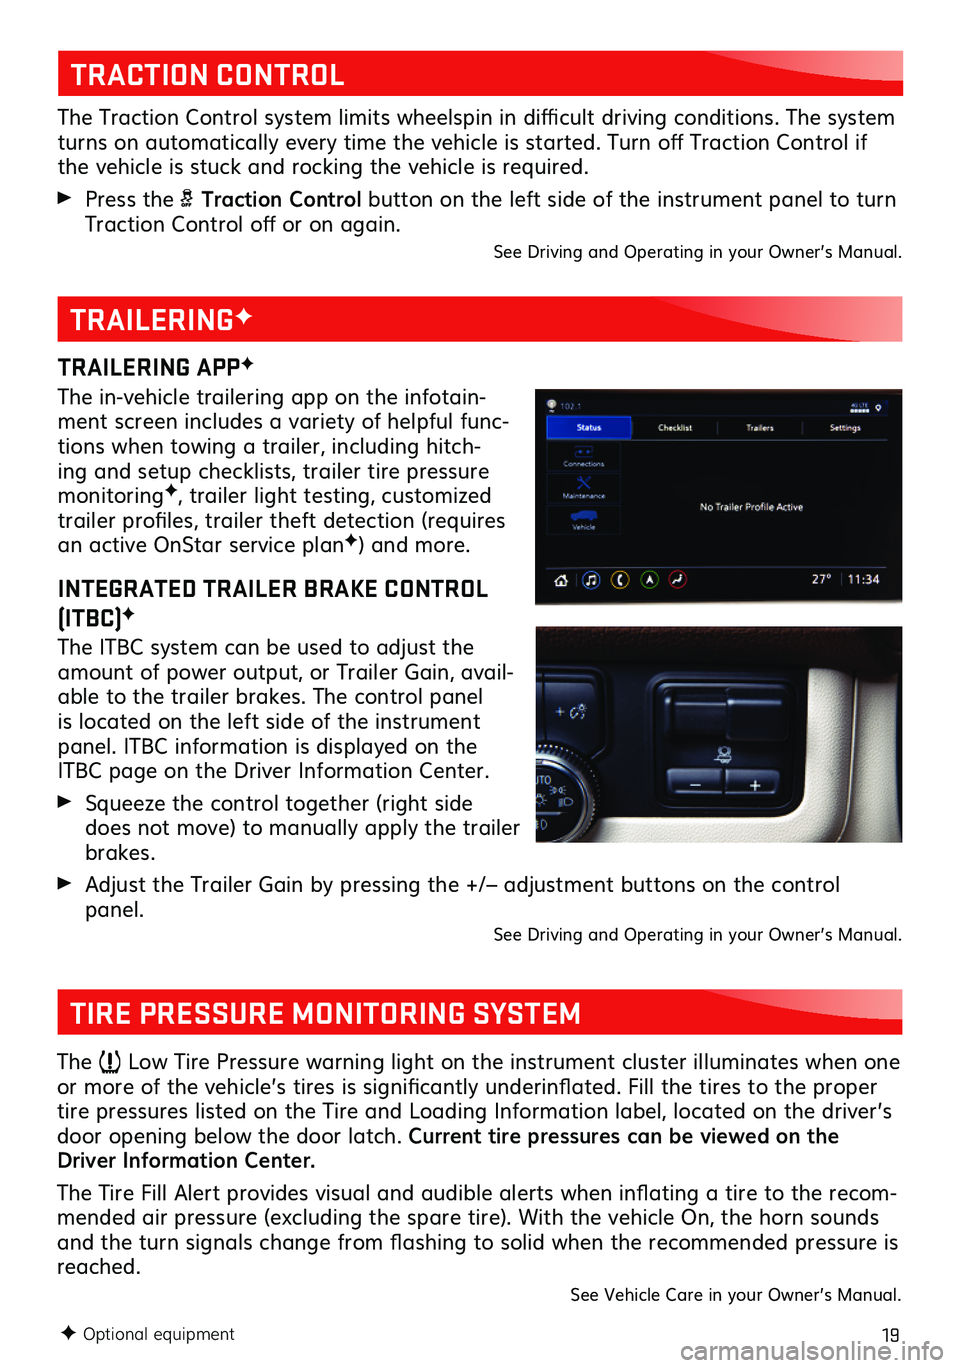 GMC YUKON 2021  Get To Know Guide 19
TRAILERING APPF
The in-vehicle trailering app on the infotain-ment screen includes a variety of helpful func-tions when towing a trailer, including hitch-ing and setup checklists, trailer tire pres